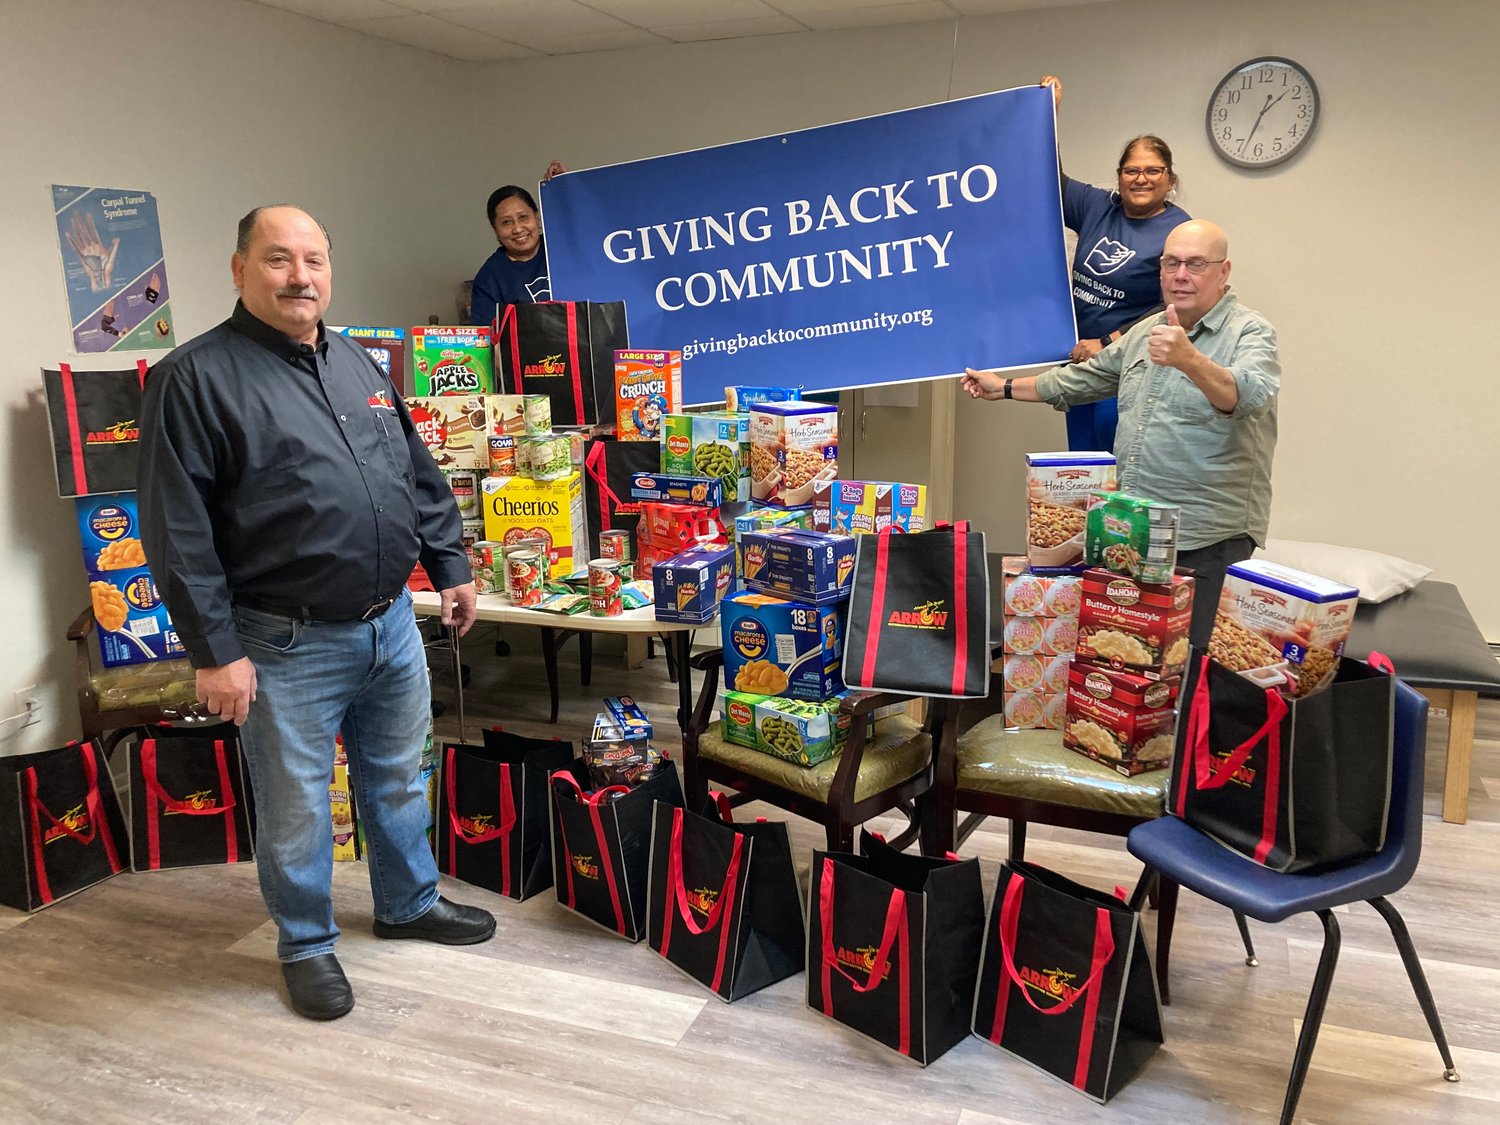 With all the food that was collected from left were Tom Jordan, Jenny DeFreitas, Luci Baijnath and Rafael Corro that included a substantial donation from Arrow Exterminating.